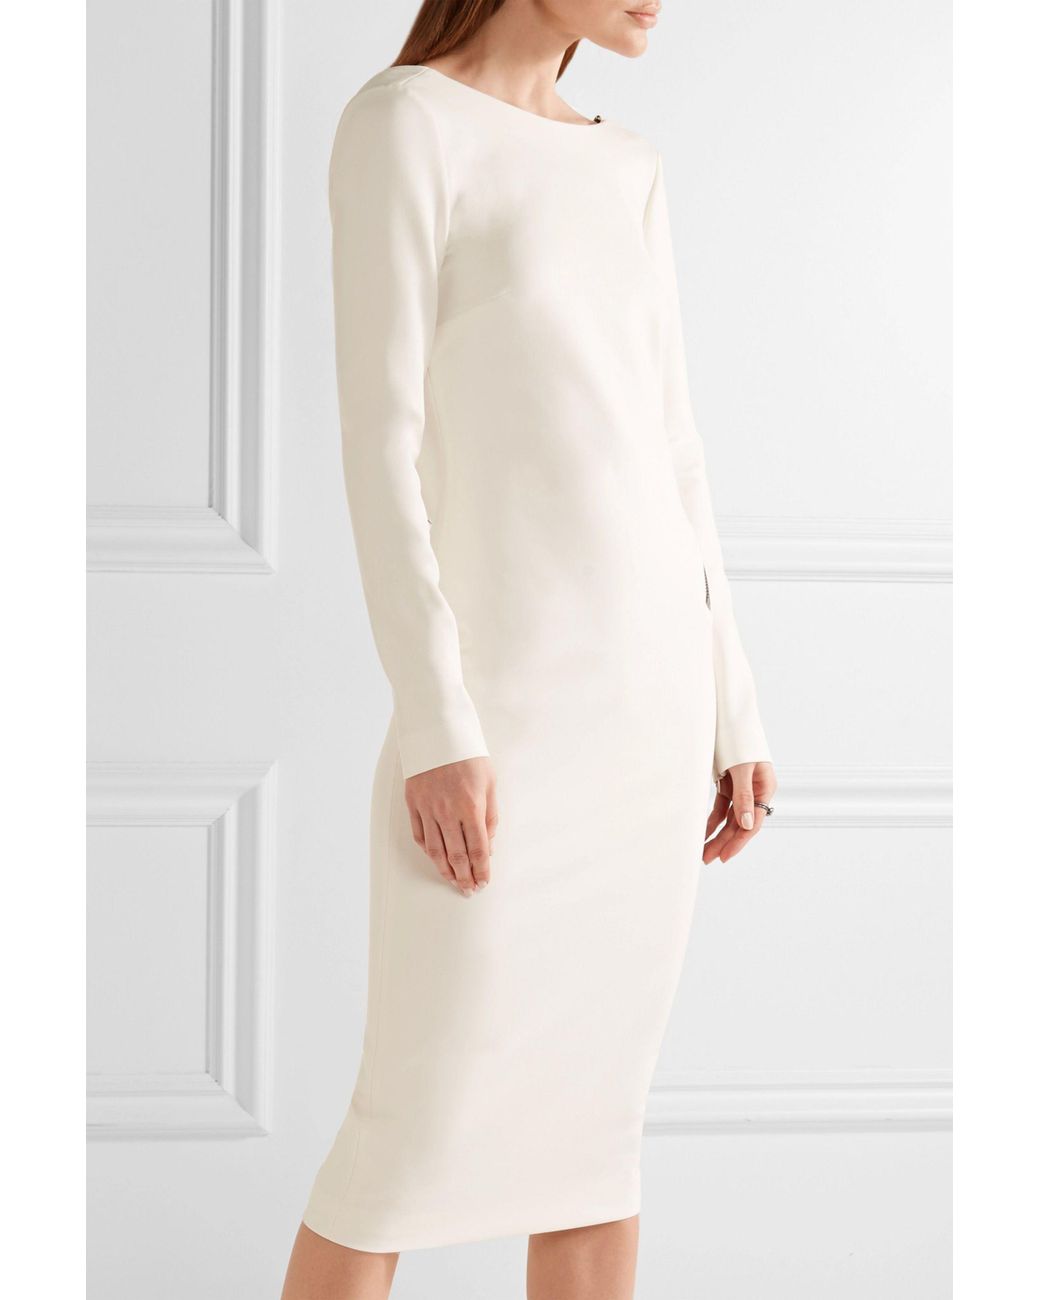 Tom Ford Open-back Zip-detailed Stretch-crepe Dress in White | Lyst